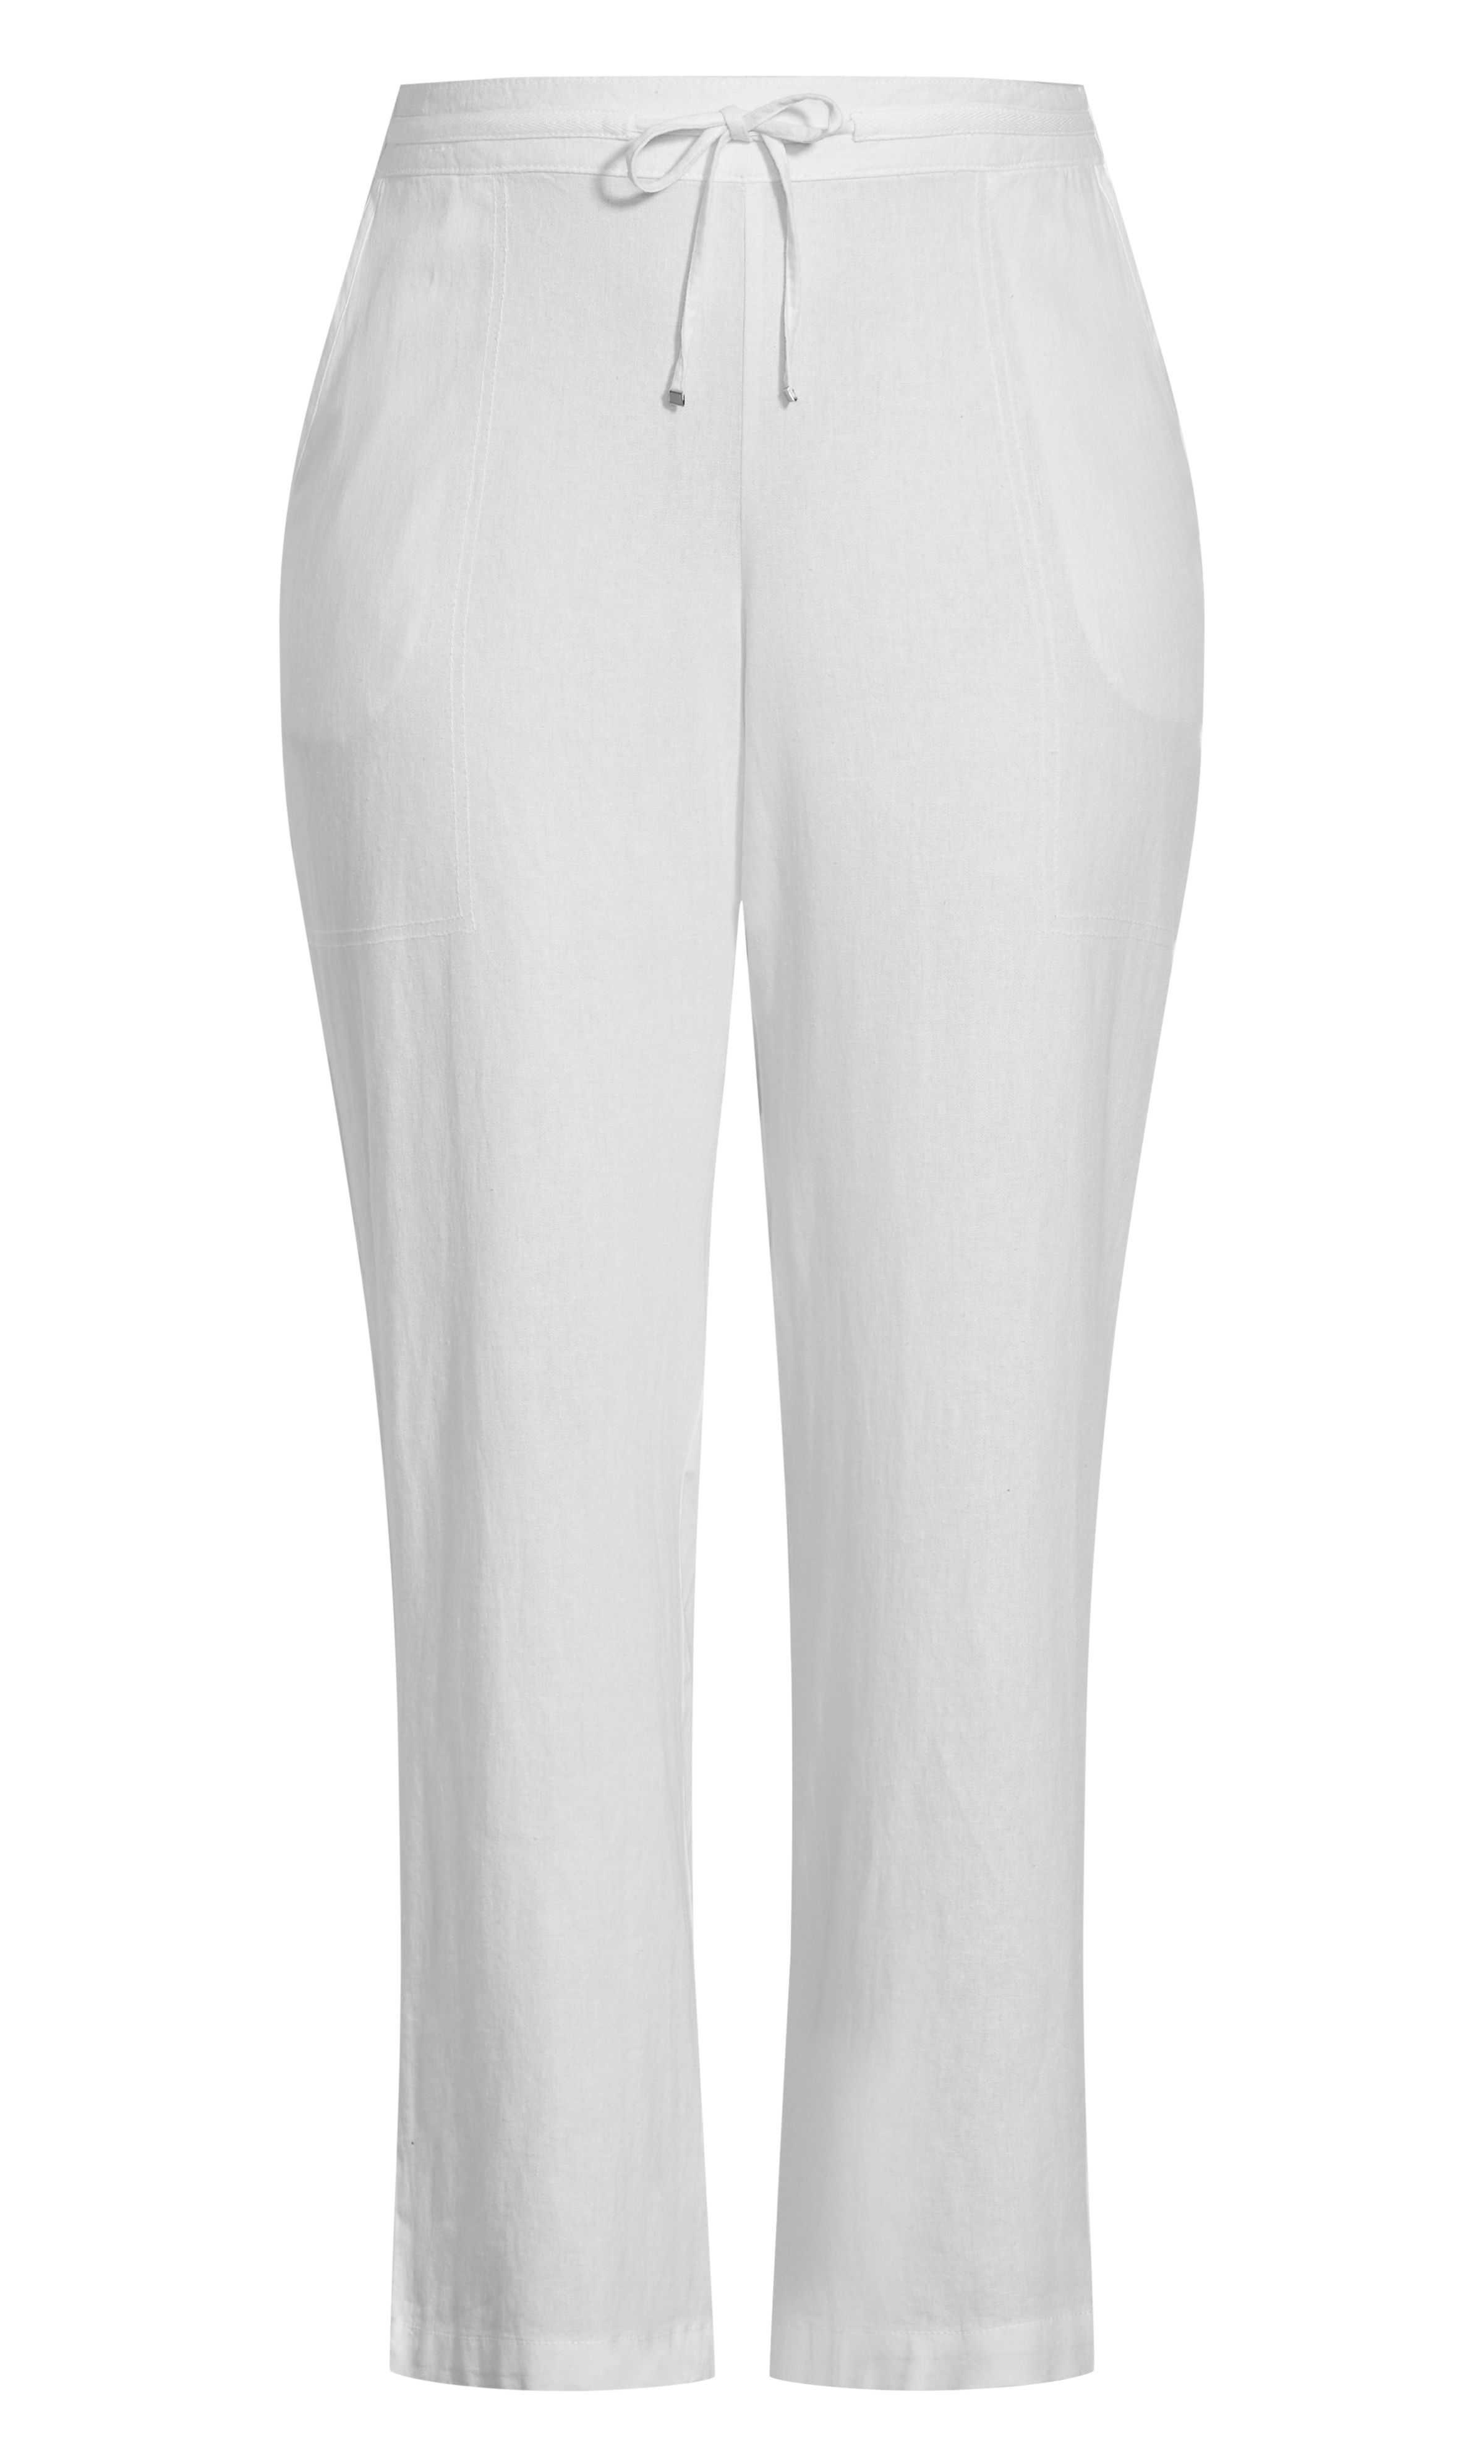 Perfect crisp, summer style with the Linen Blend Trouser. Featuring functional pockets, a drawstring waist and a straight leg fit, these breezy trousers are the ultimate blend of comfort and style. Key Features Include: - Drawstring waist with elasticated back - Functional side & back pockets - Linen blend fabrication - Relaxed wide leg fit - Full length Add a pop of colour with a vibrantly printed tee.